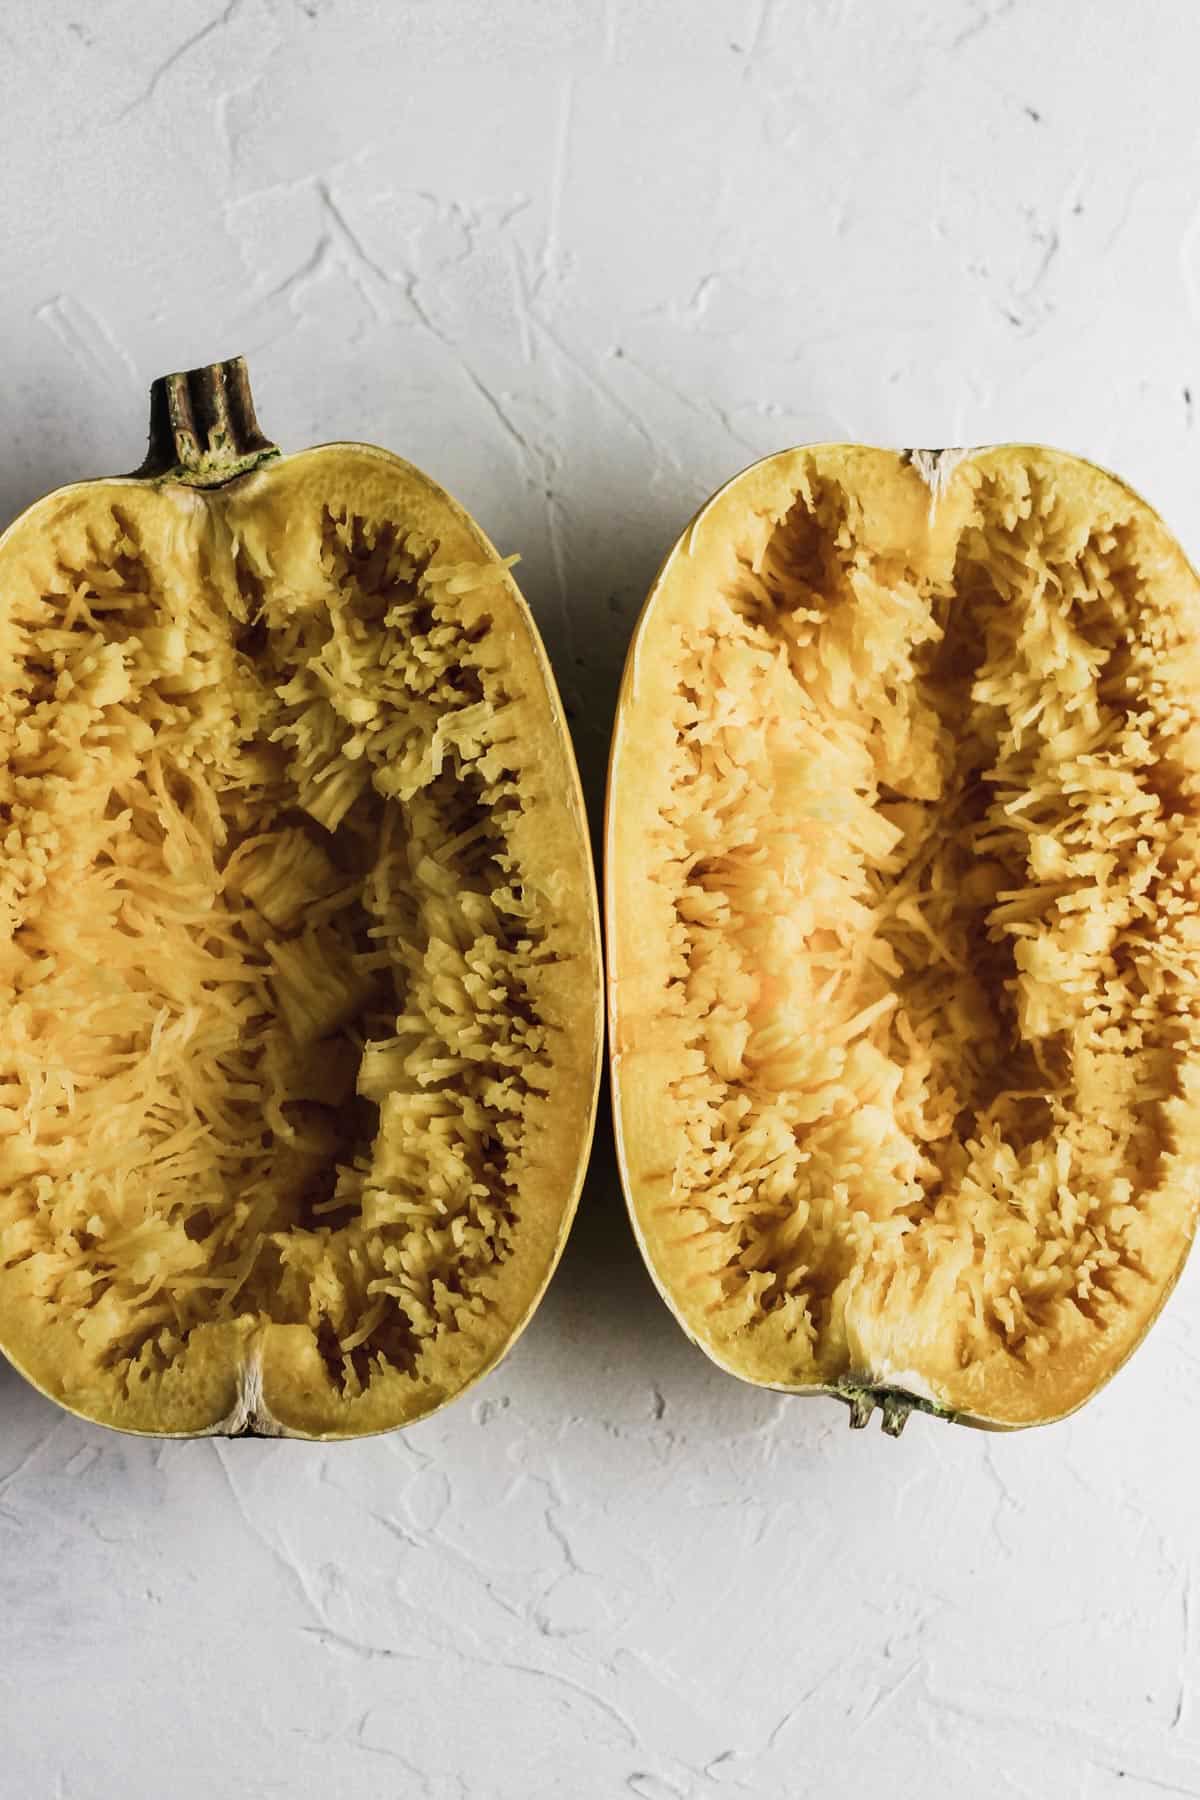 Halved cooked spaghetti squash with spaghetti strands pulled out with a fork.